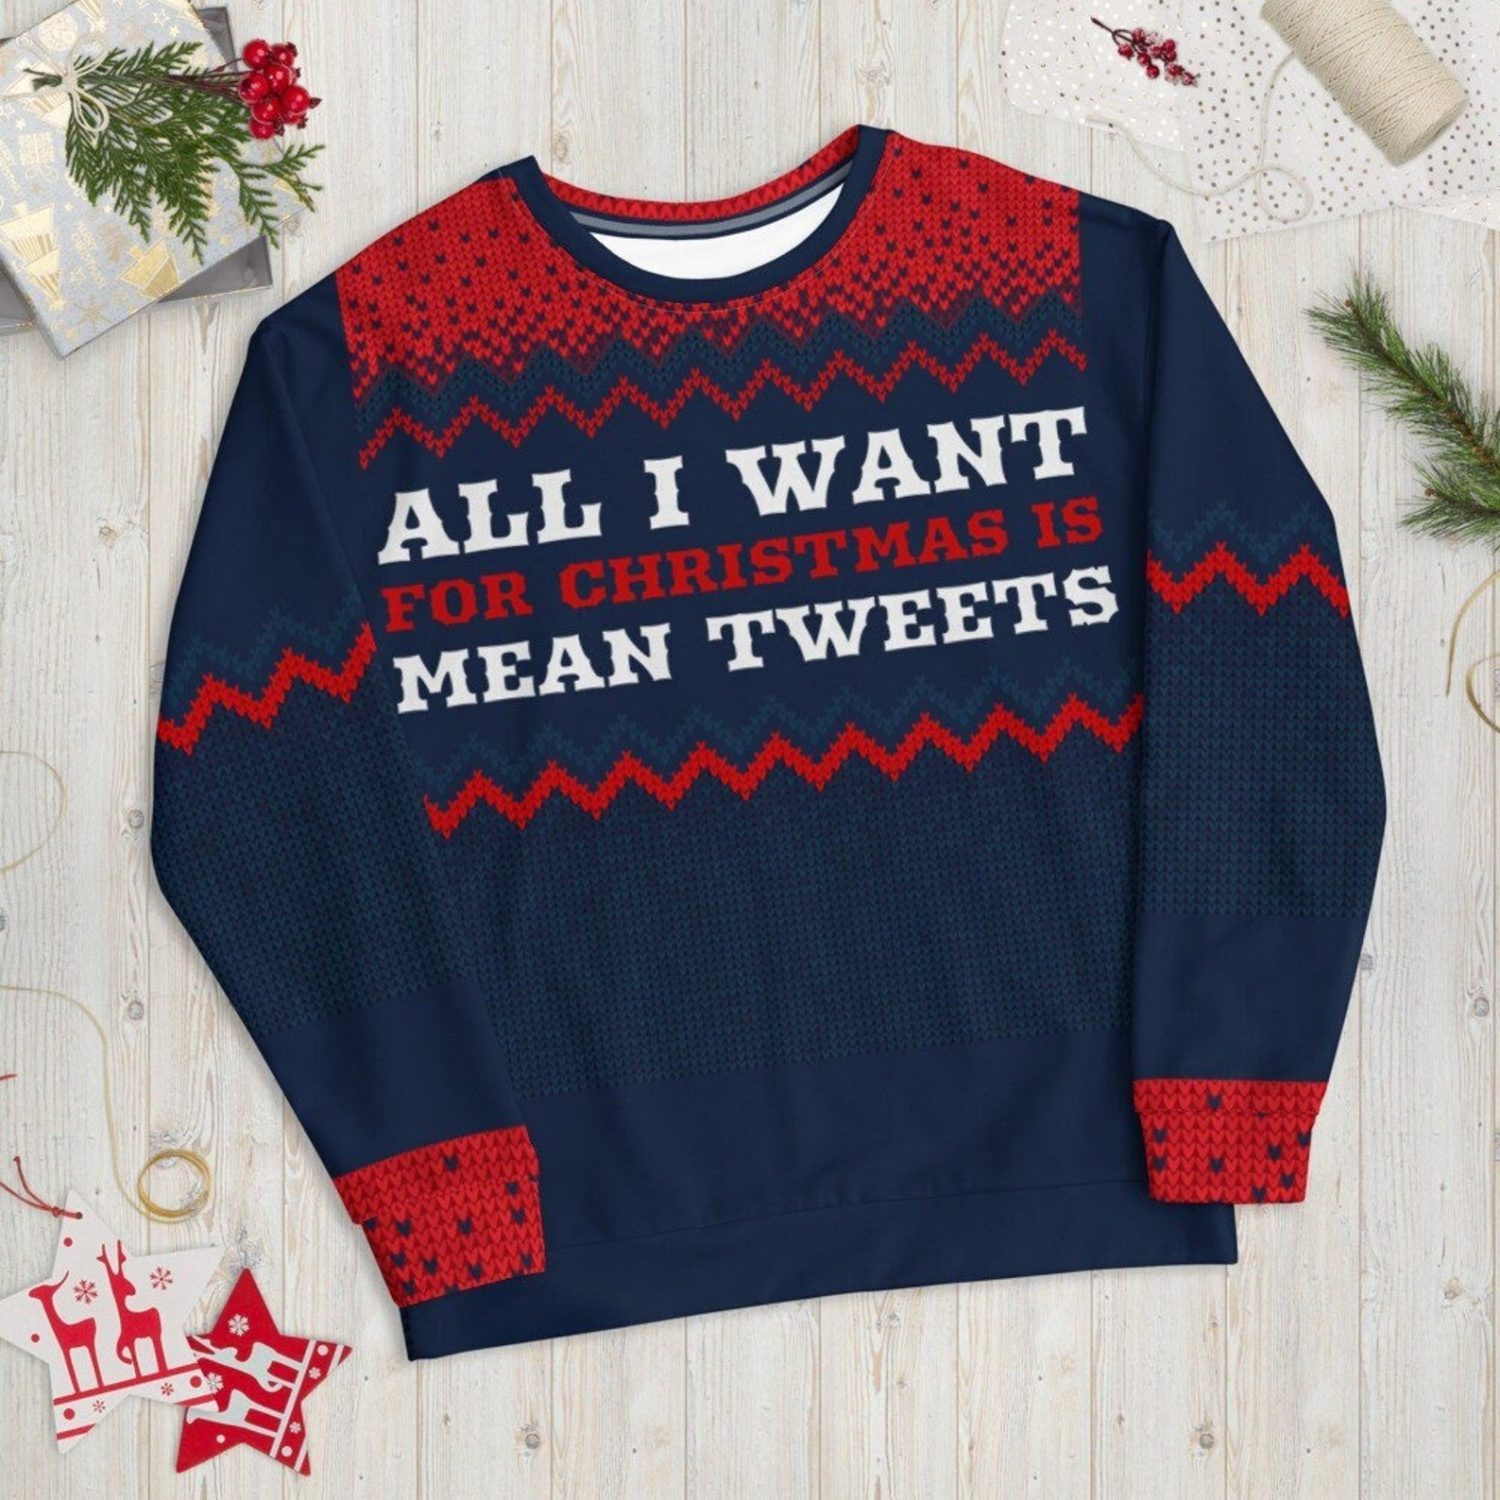 All I Want For Christmas Is Mean Tweets Christmas Sweater AOP Sweater Navy S